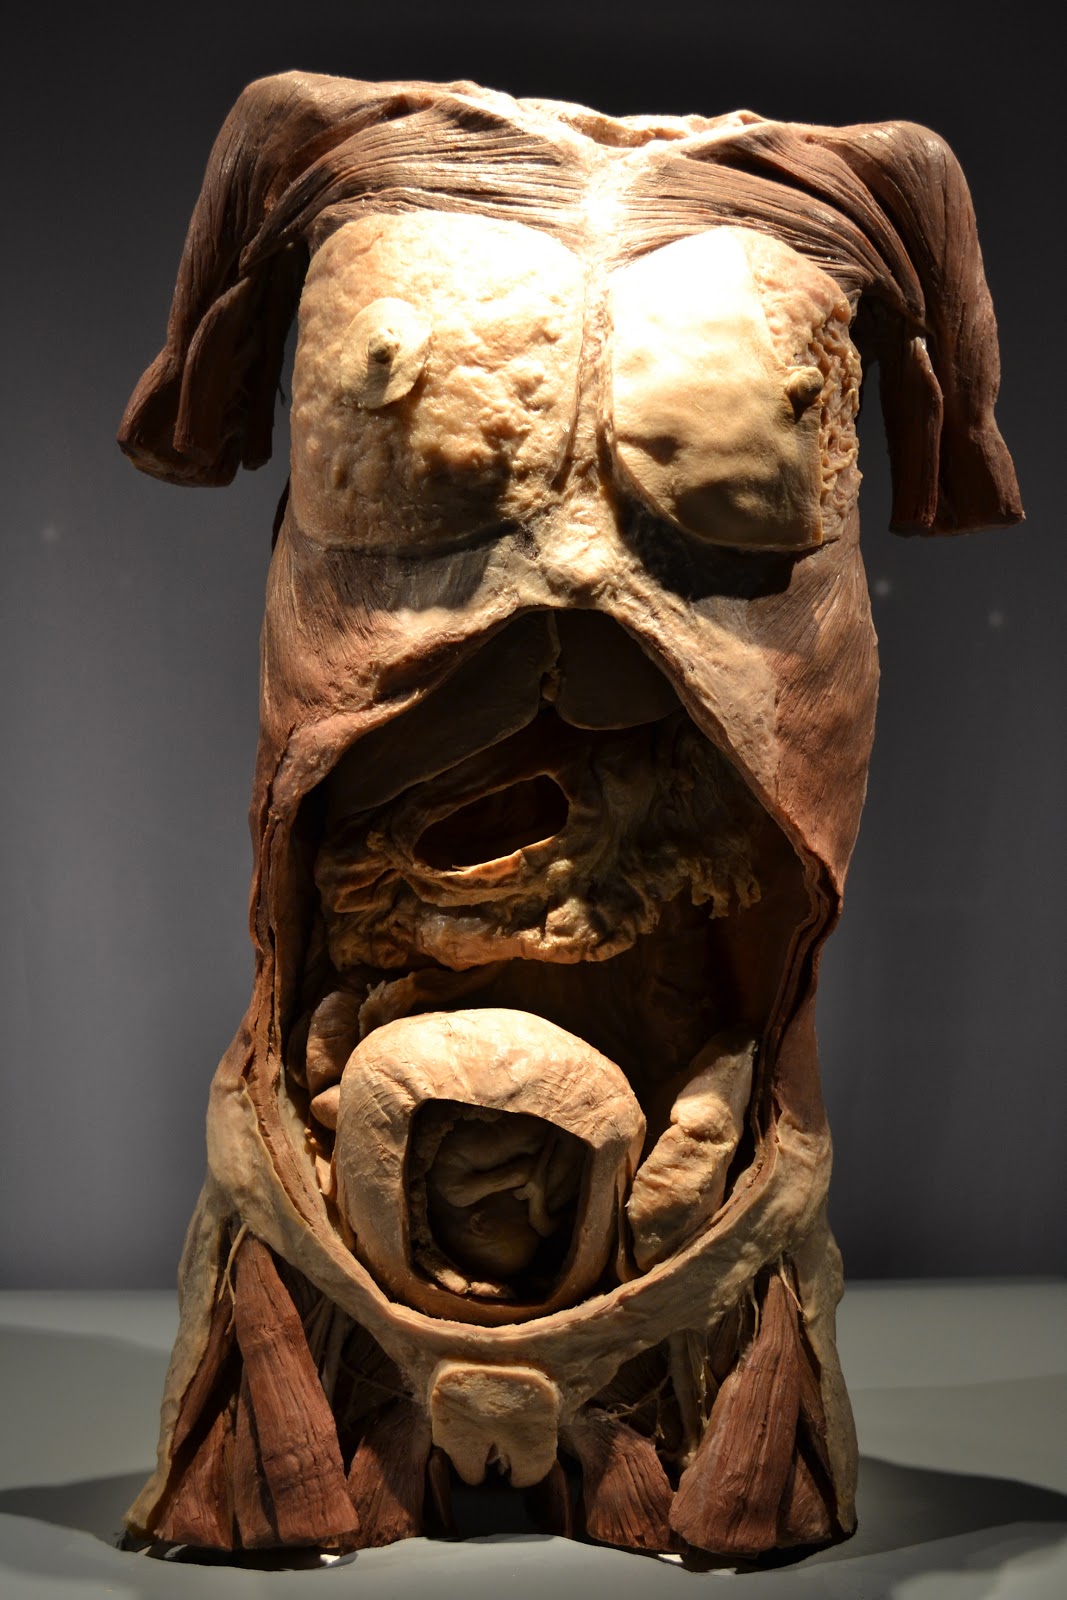 We'll Tell You - A&W Couple's Blog: The Human Bodies Exhibition at The